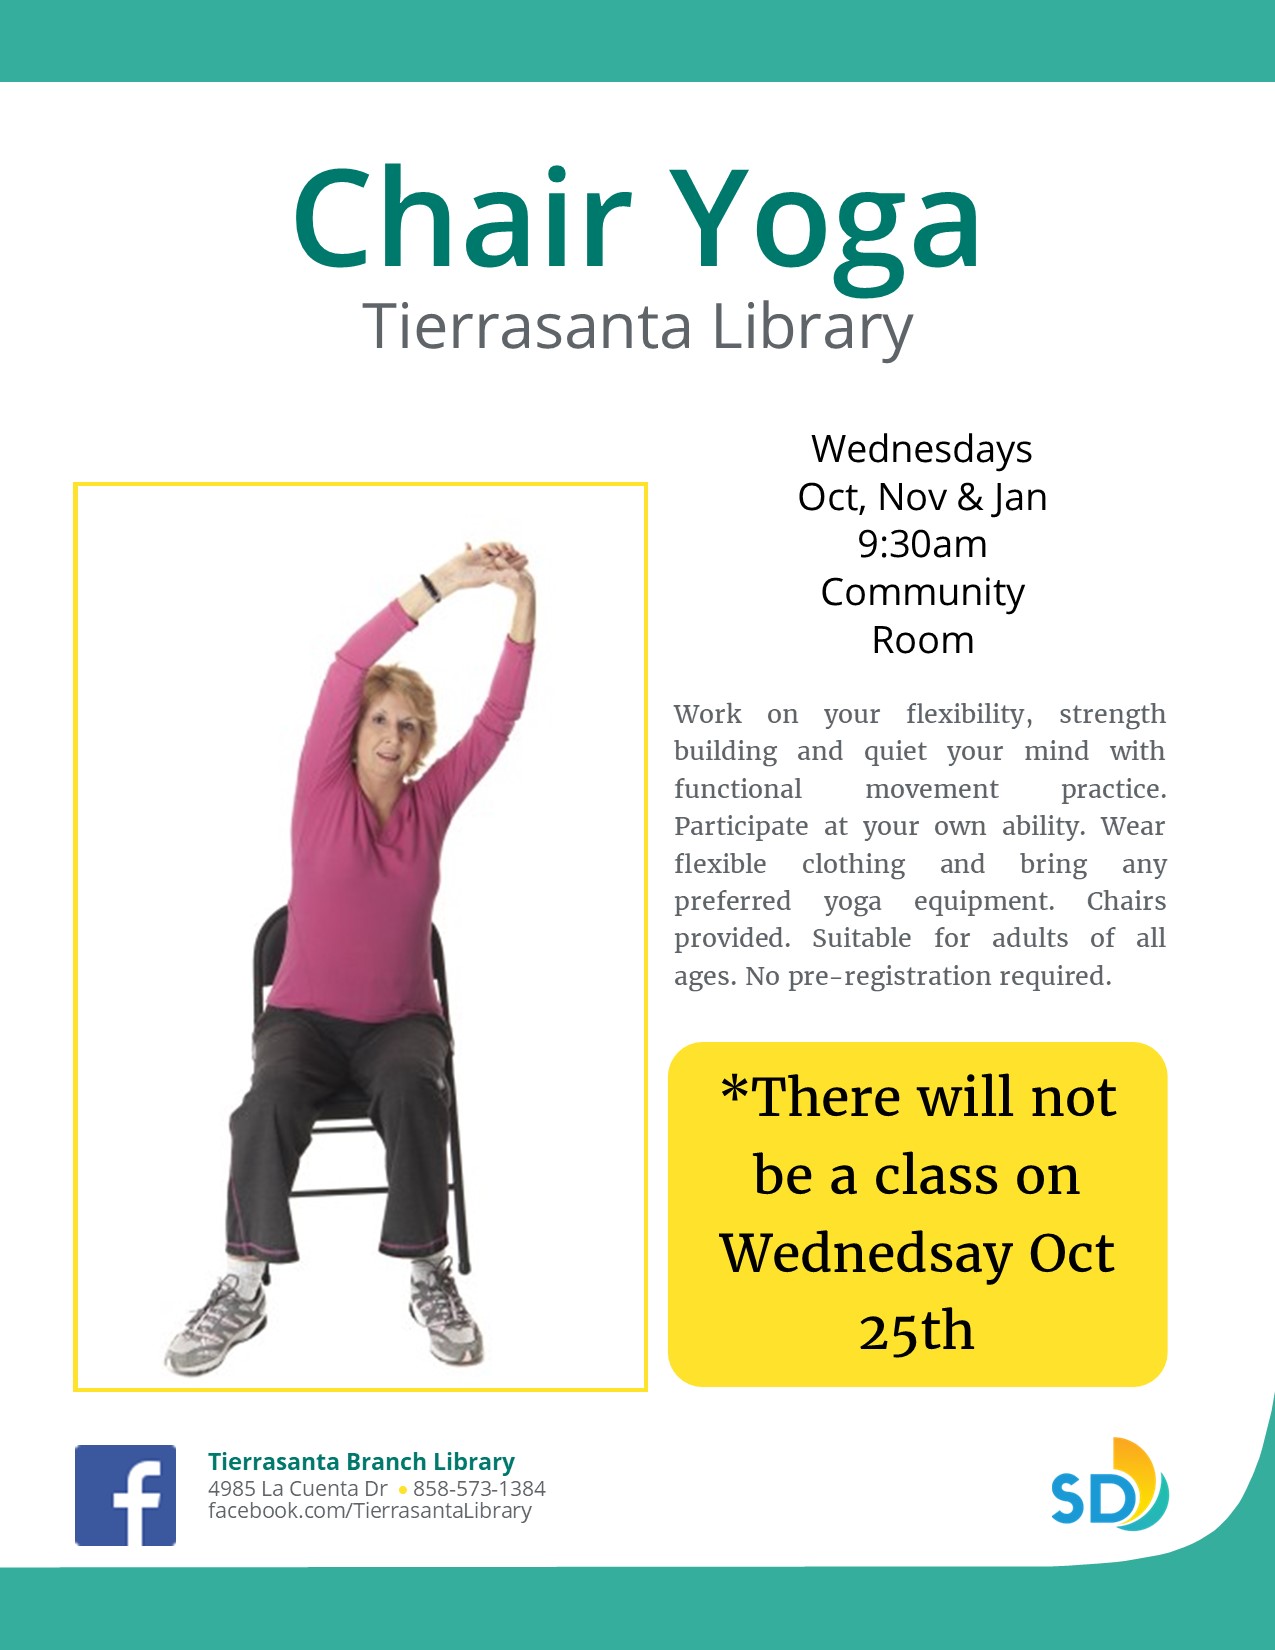 Flyer with the image of an older woman sitting in a chair doing stretches